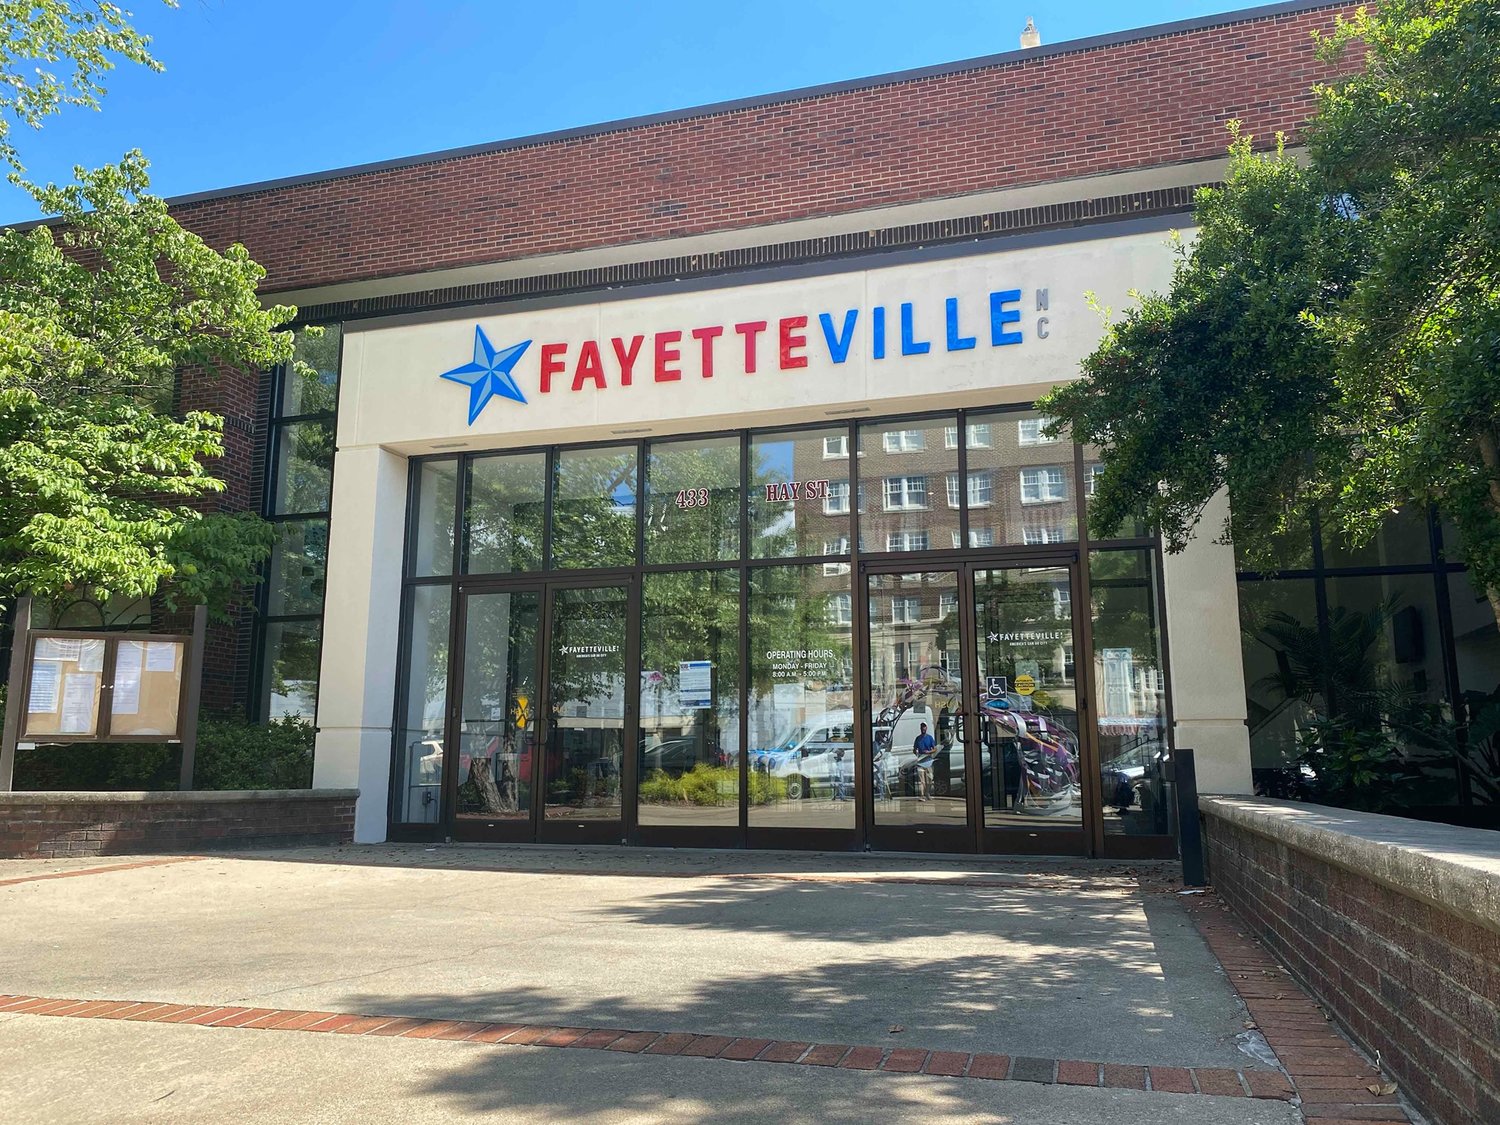 The City Council on Monday tabled consideration of the Vote Yes Fayetteville initiative which would change the way City Council members are elected. The council tabled consideration of a resolution calling for the issue to be put before city voters.